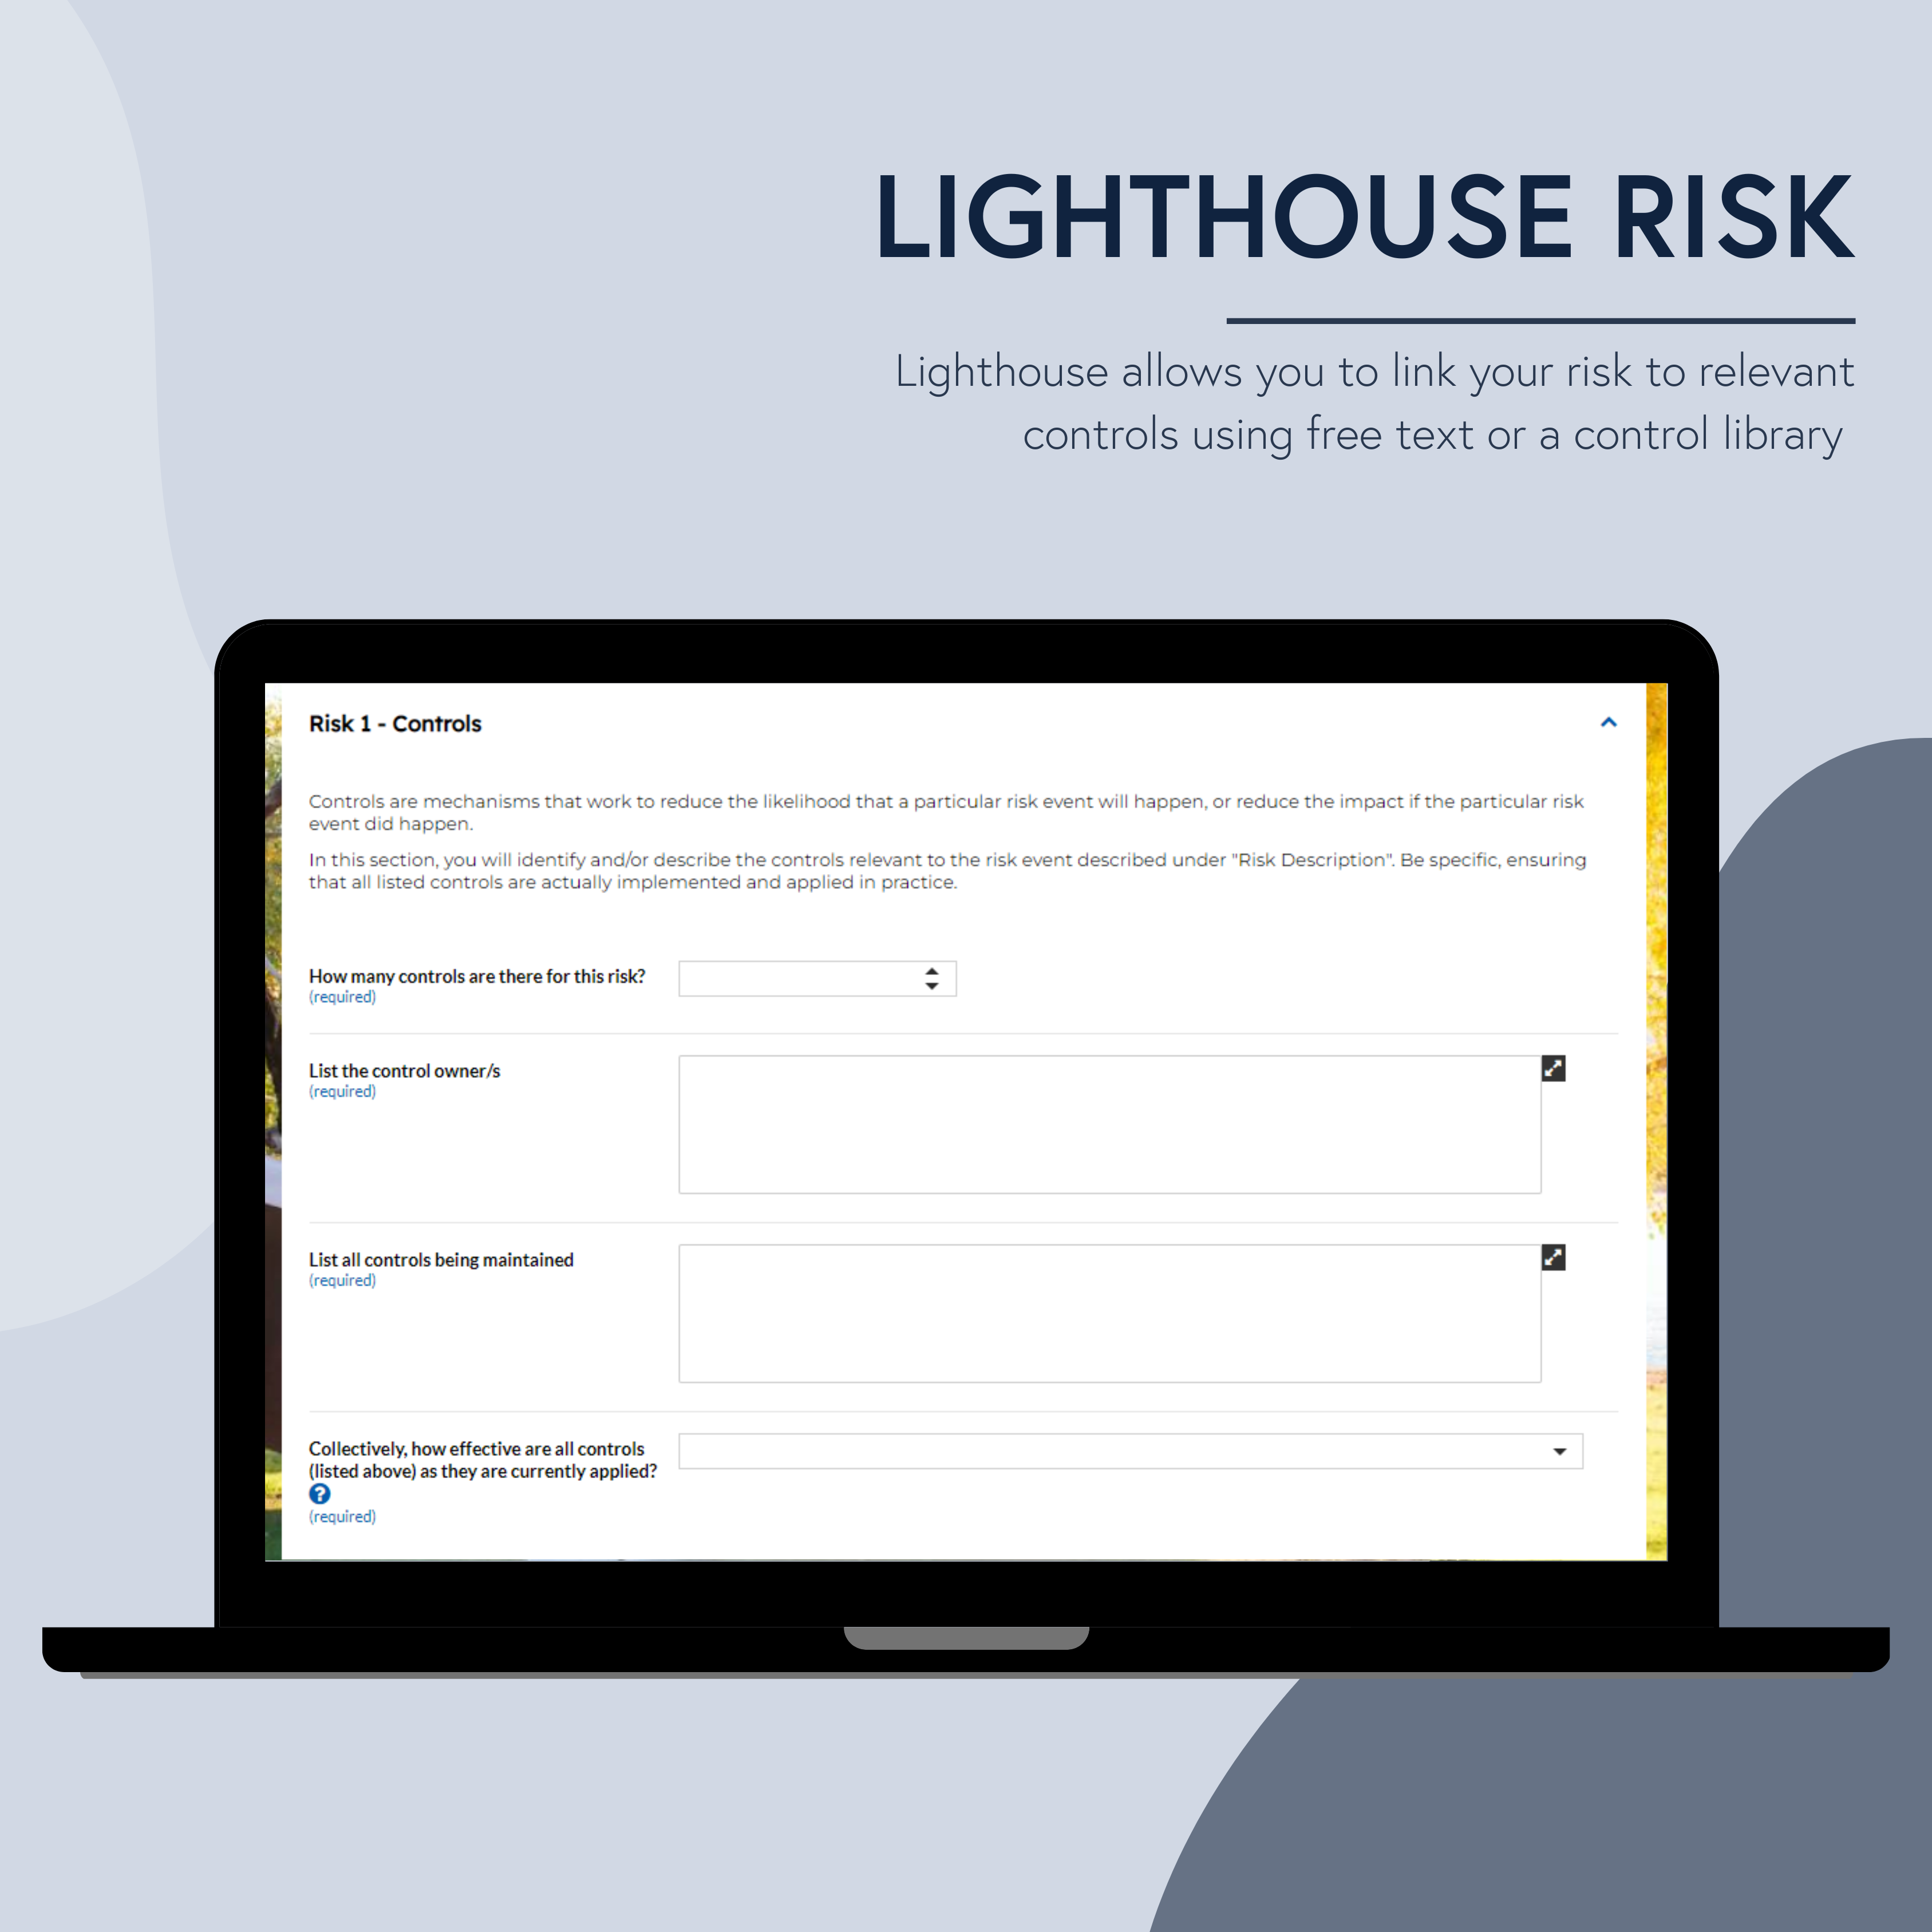 Lighthouse allows you to link your risk to relevant controls using free text or a control library